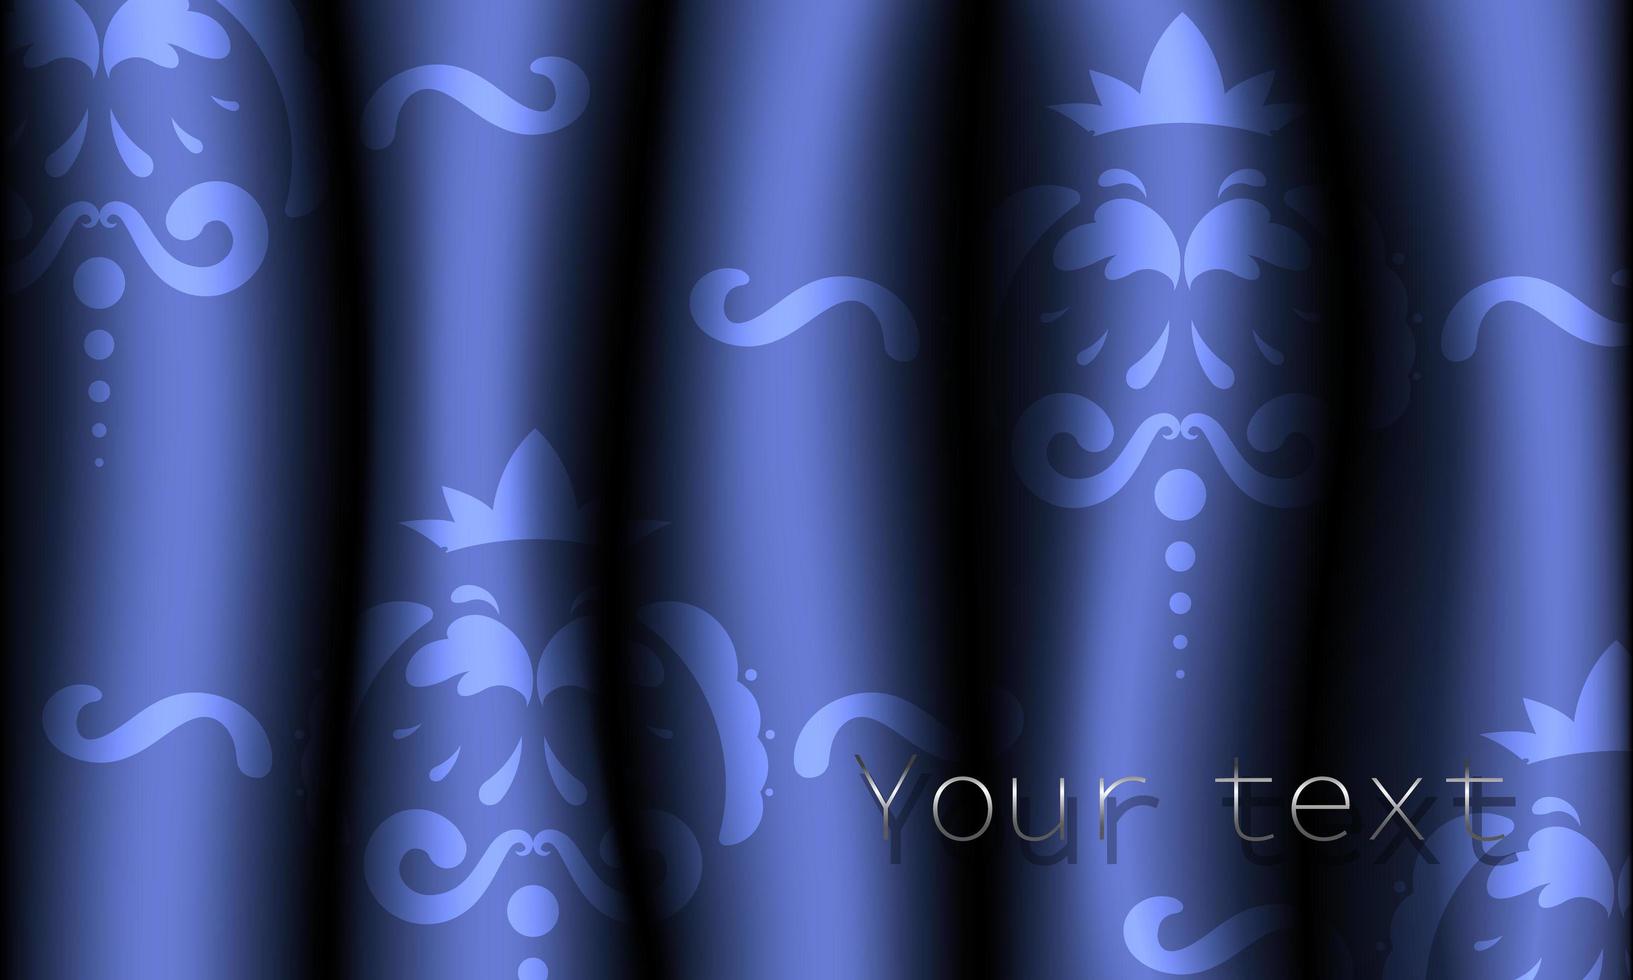 Realistic purple patterned fabric curtains. Pattern on drapes. Vector illustration.